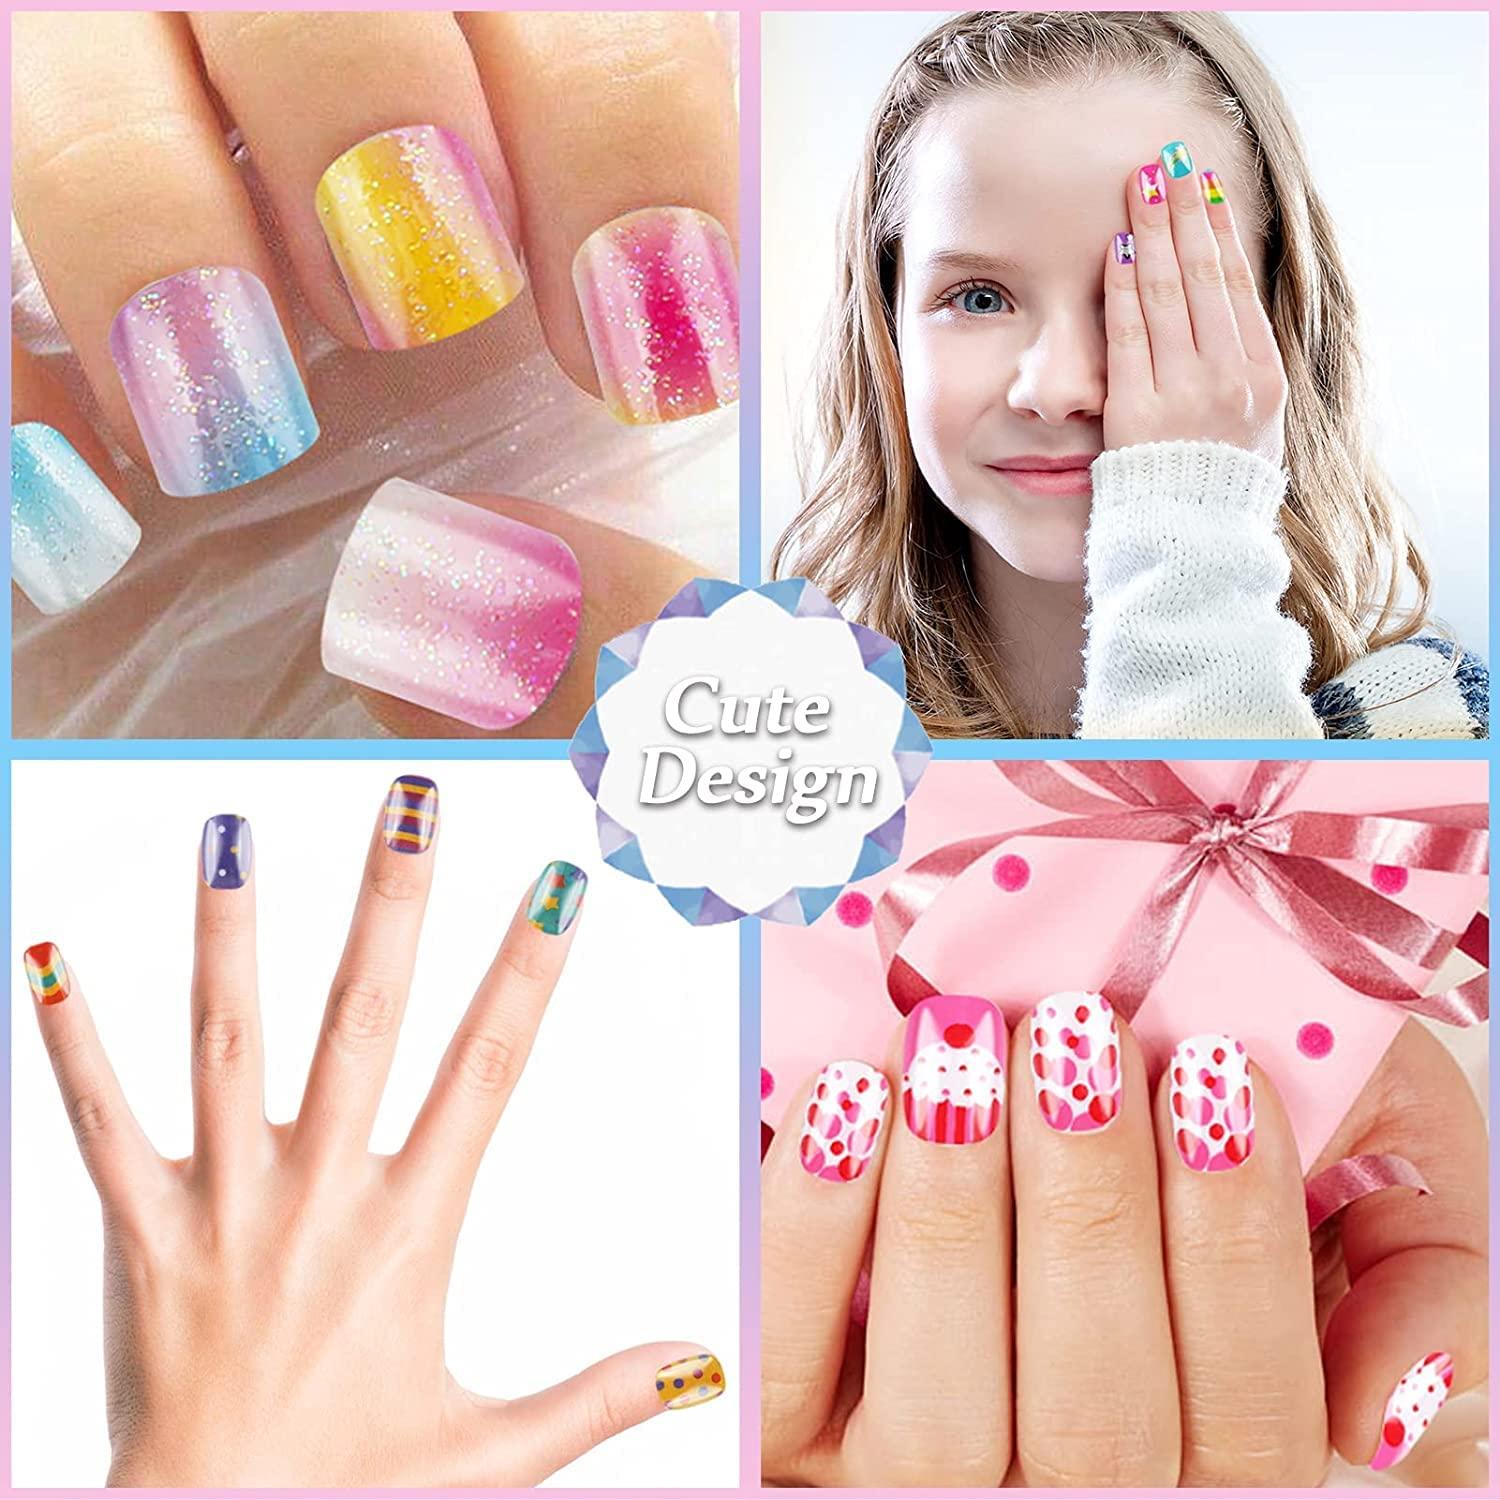 Buy NewAir Pink Cat: False Nails for Kids 24 Pcs Press On Girls Cute Fake  Nails Tips Online at Low Prices in India - Amazon.in